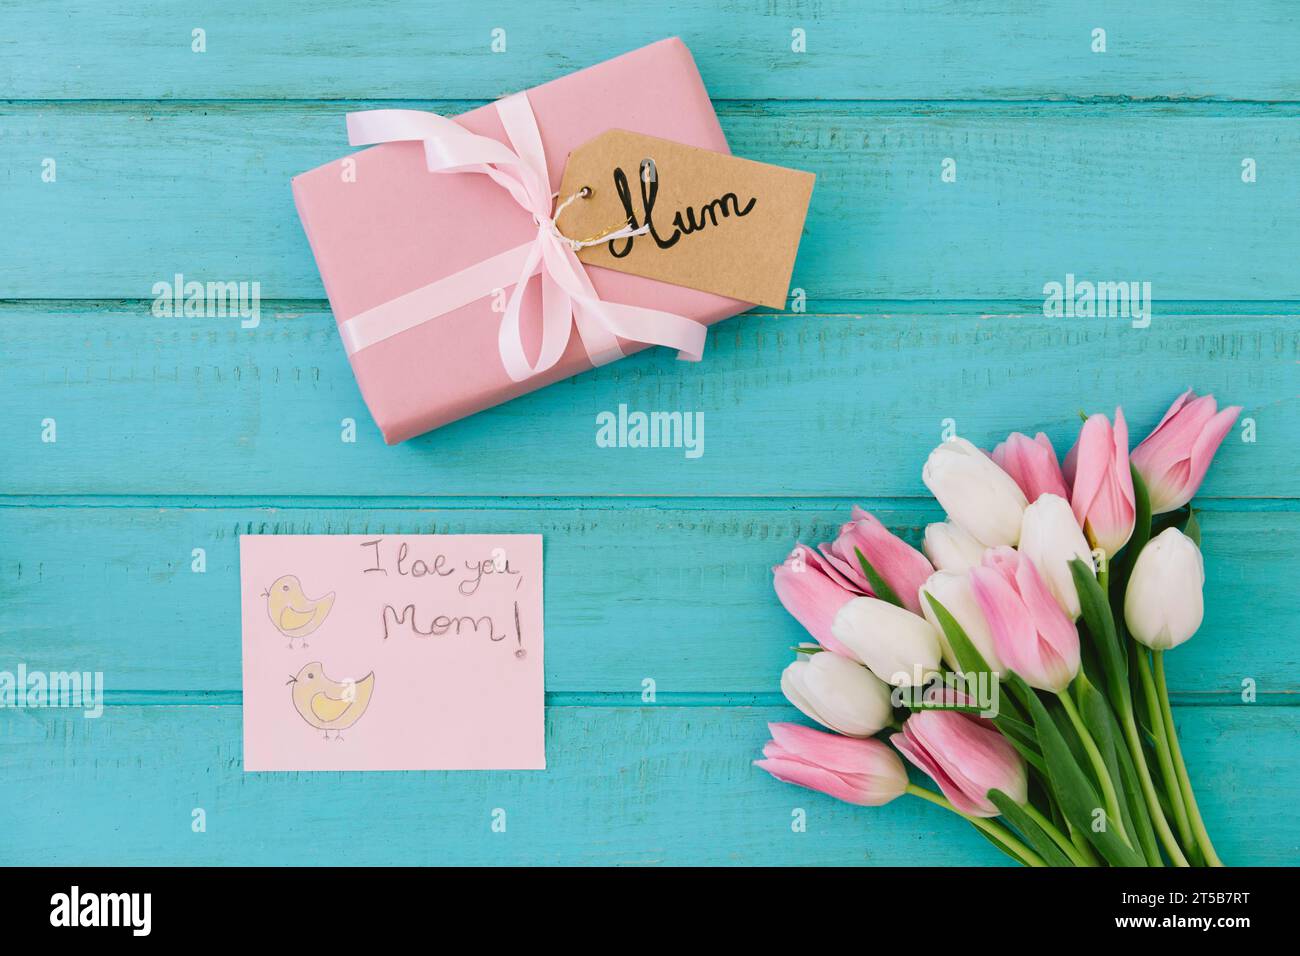 I love you mom inscription with tulips gift Stock Photo